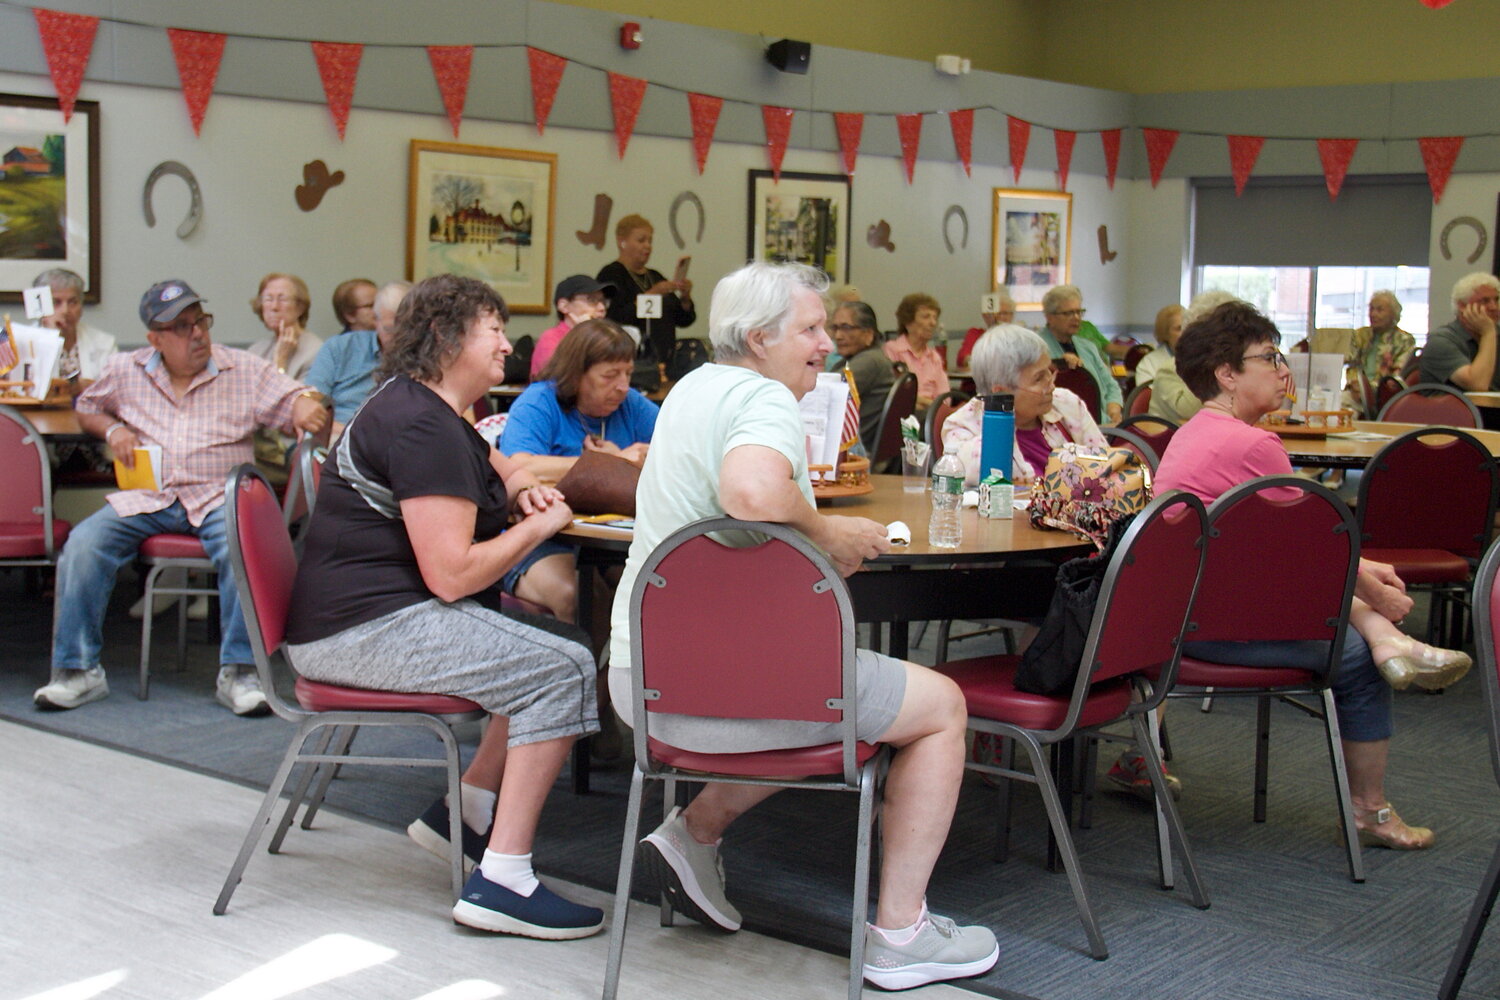 Seniors paid close attention on how to handle an emergency situation, including how to ration essential items like food and best use the emergency supplies provided.